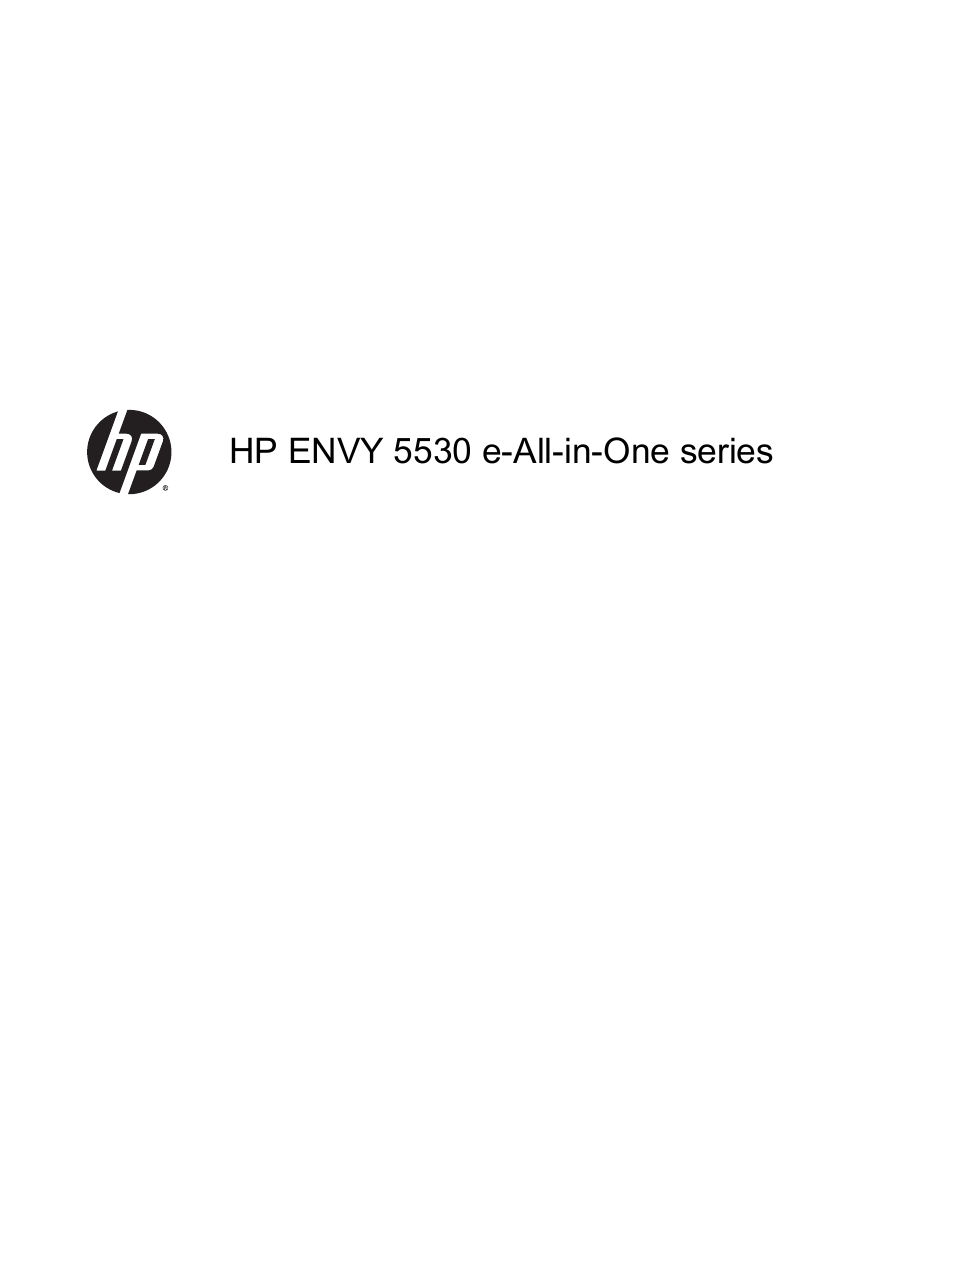 HP ENVY 5530 e-All-in-One Printer User Manual | 108 pages